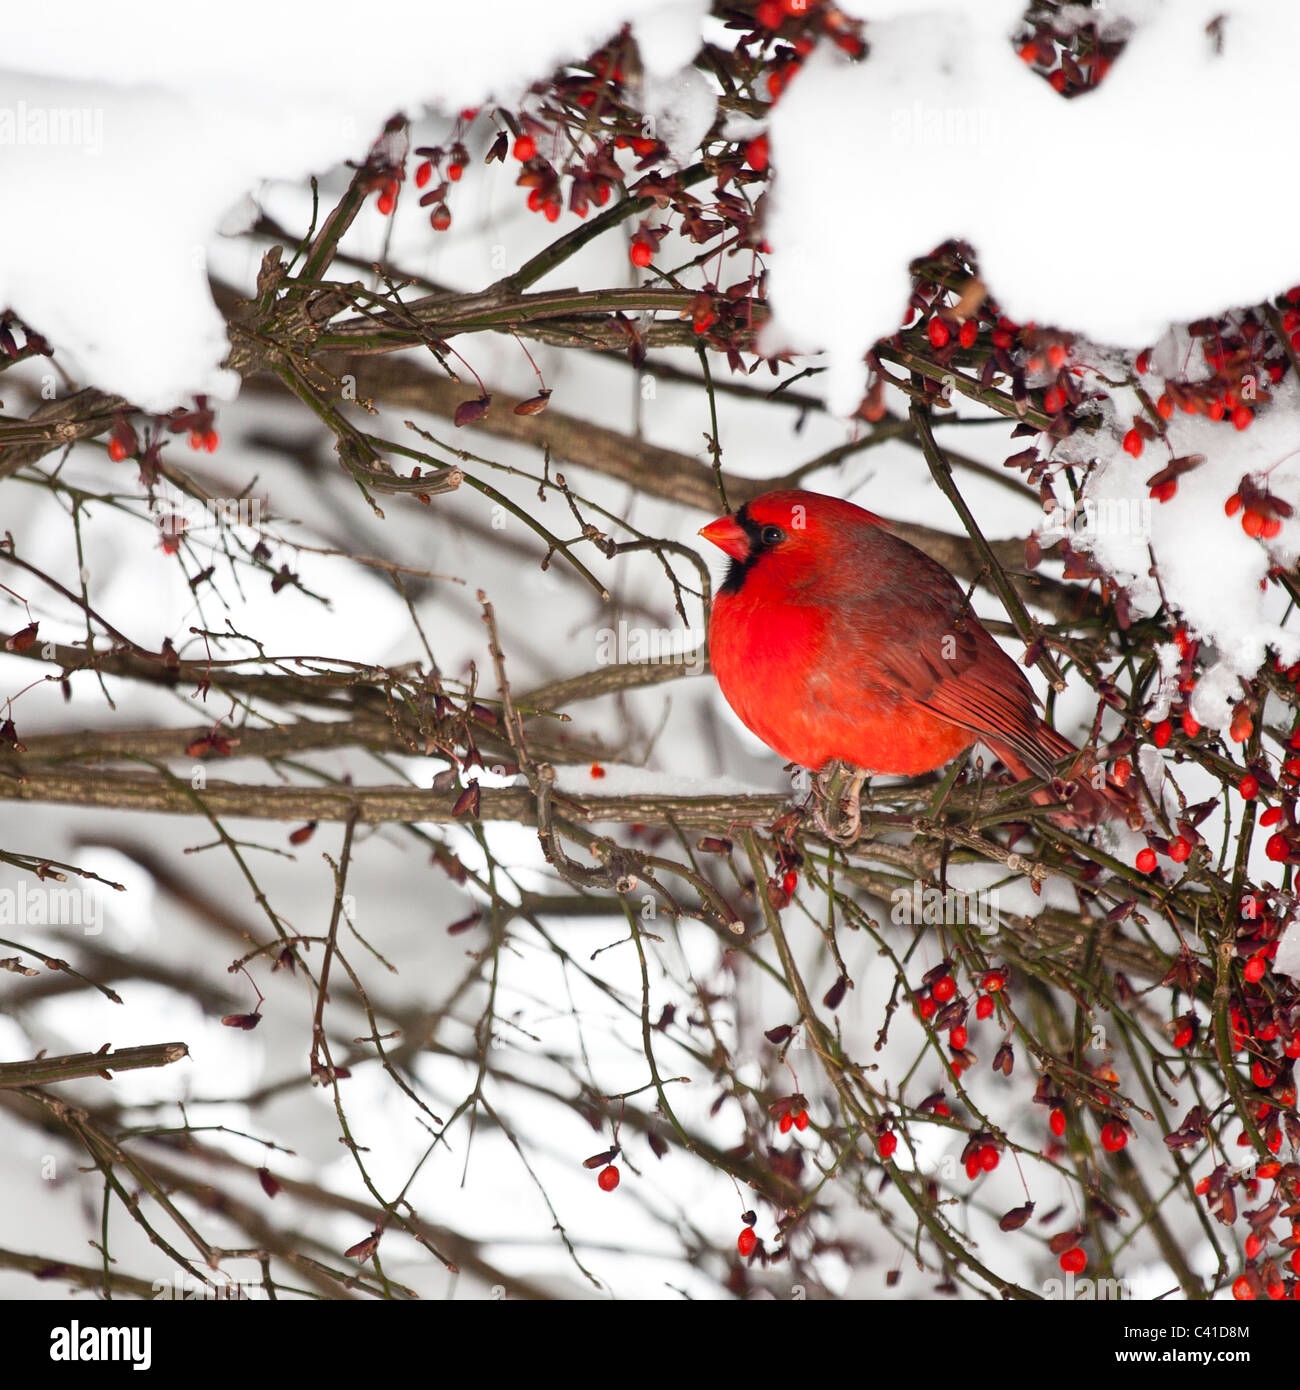 Cardinal in a snowy red berry bush. A bright red Northern cardinal perched in a berry clad bush surrounded by snow. Stock Photo